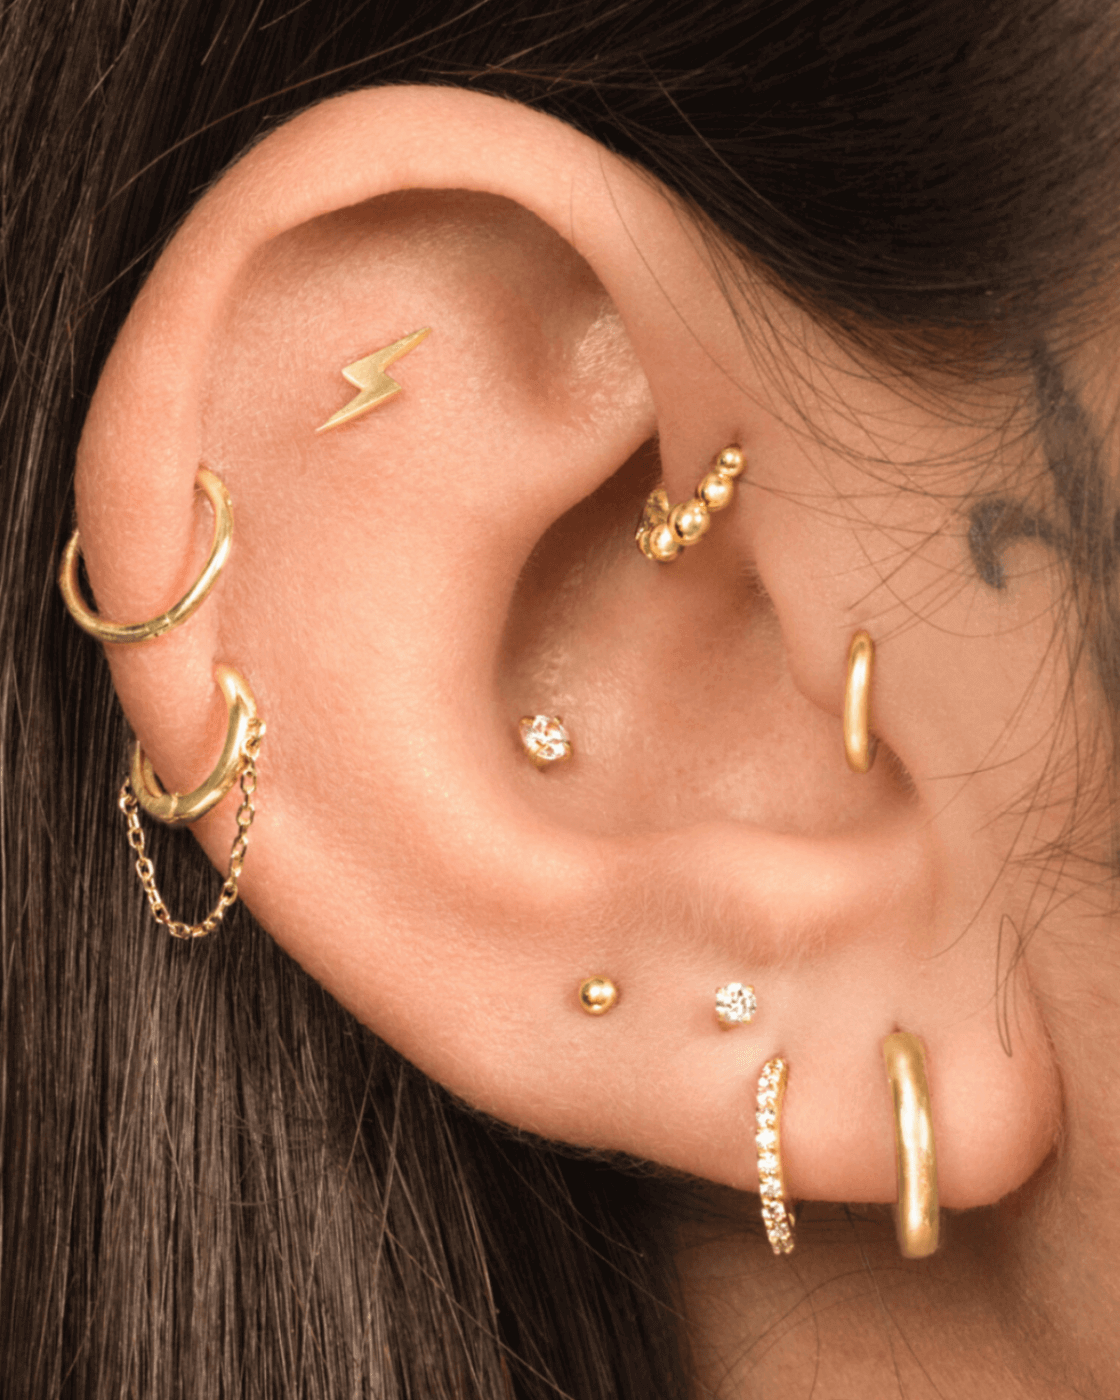 THICK DOUBLE PIERCING FRESHWATER PEARL HOOP EARRINGS- 14k Yellow Gold - The  Littl A$134.99 A$134.99 14k Yellow Gold Bridal (Jewellery Only) Double  Piercing